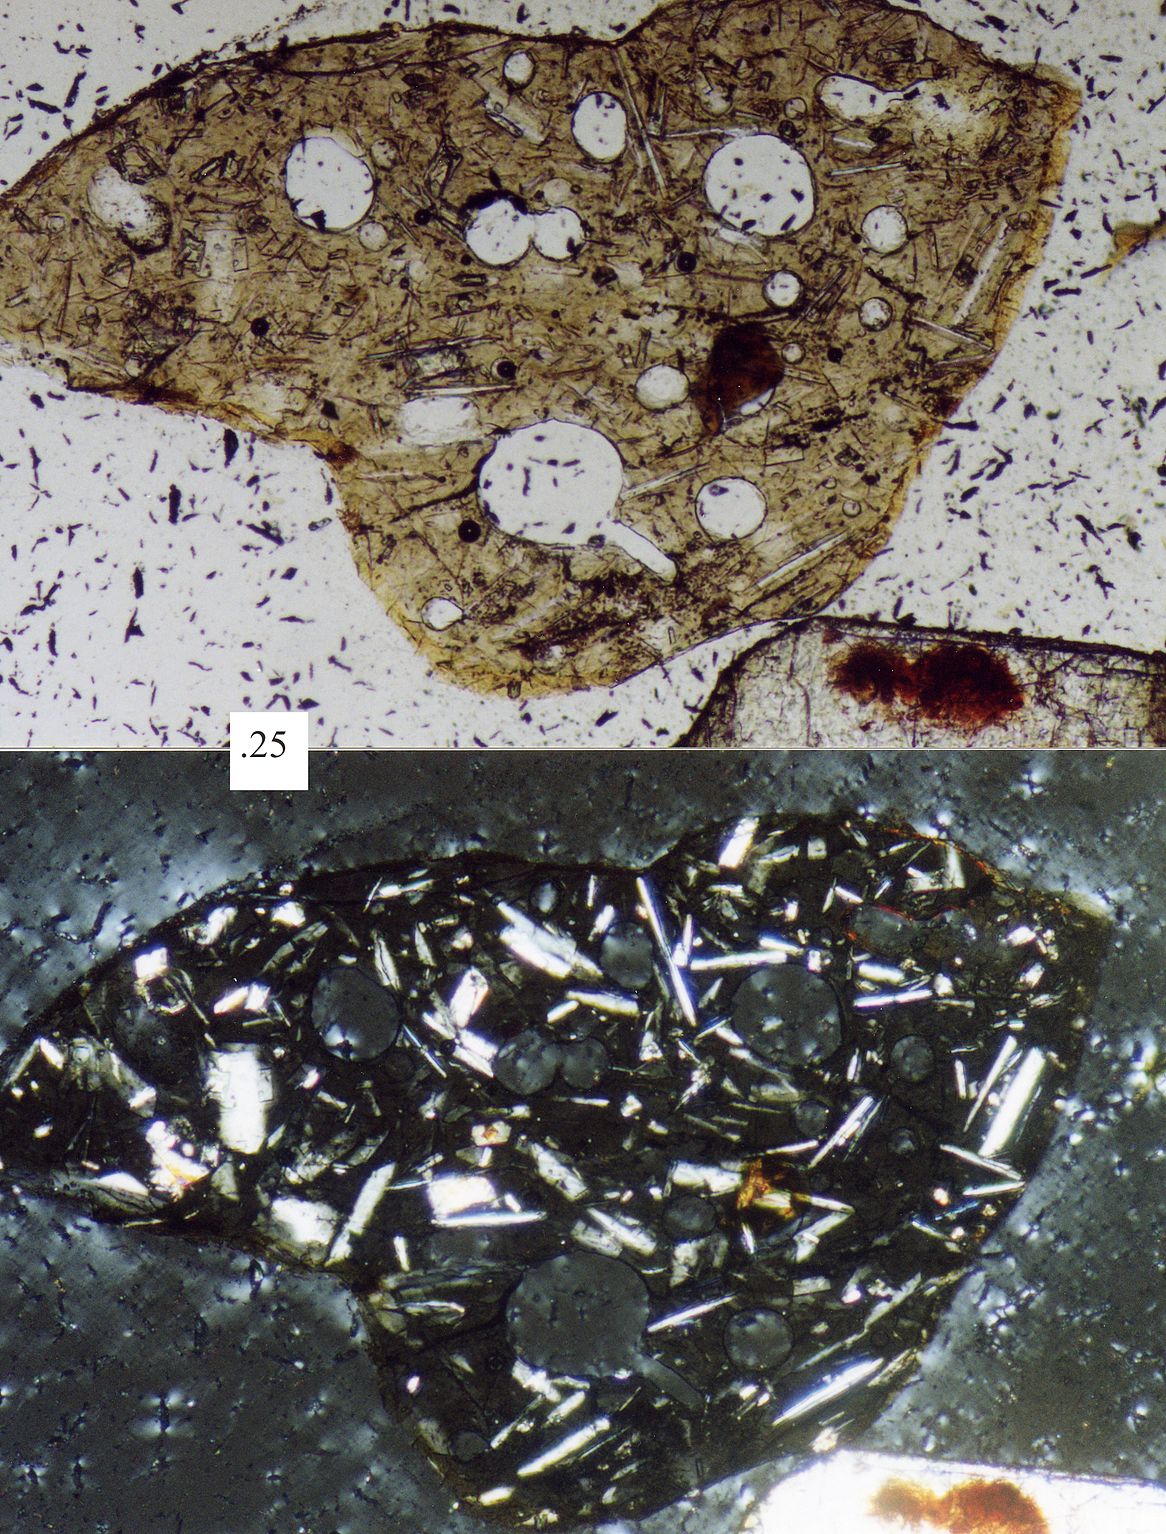 Two microscopic photos of the same sand grain made of basalt with a photo length of 0.25 mm. The top picture is plane-polarized light and shows a tan grain with numerous highlighted holes throughout it while the bottom is cross-polarized light and shows a black grain with numerous highlighted elongated grains throughout it.